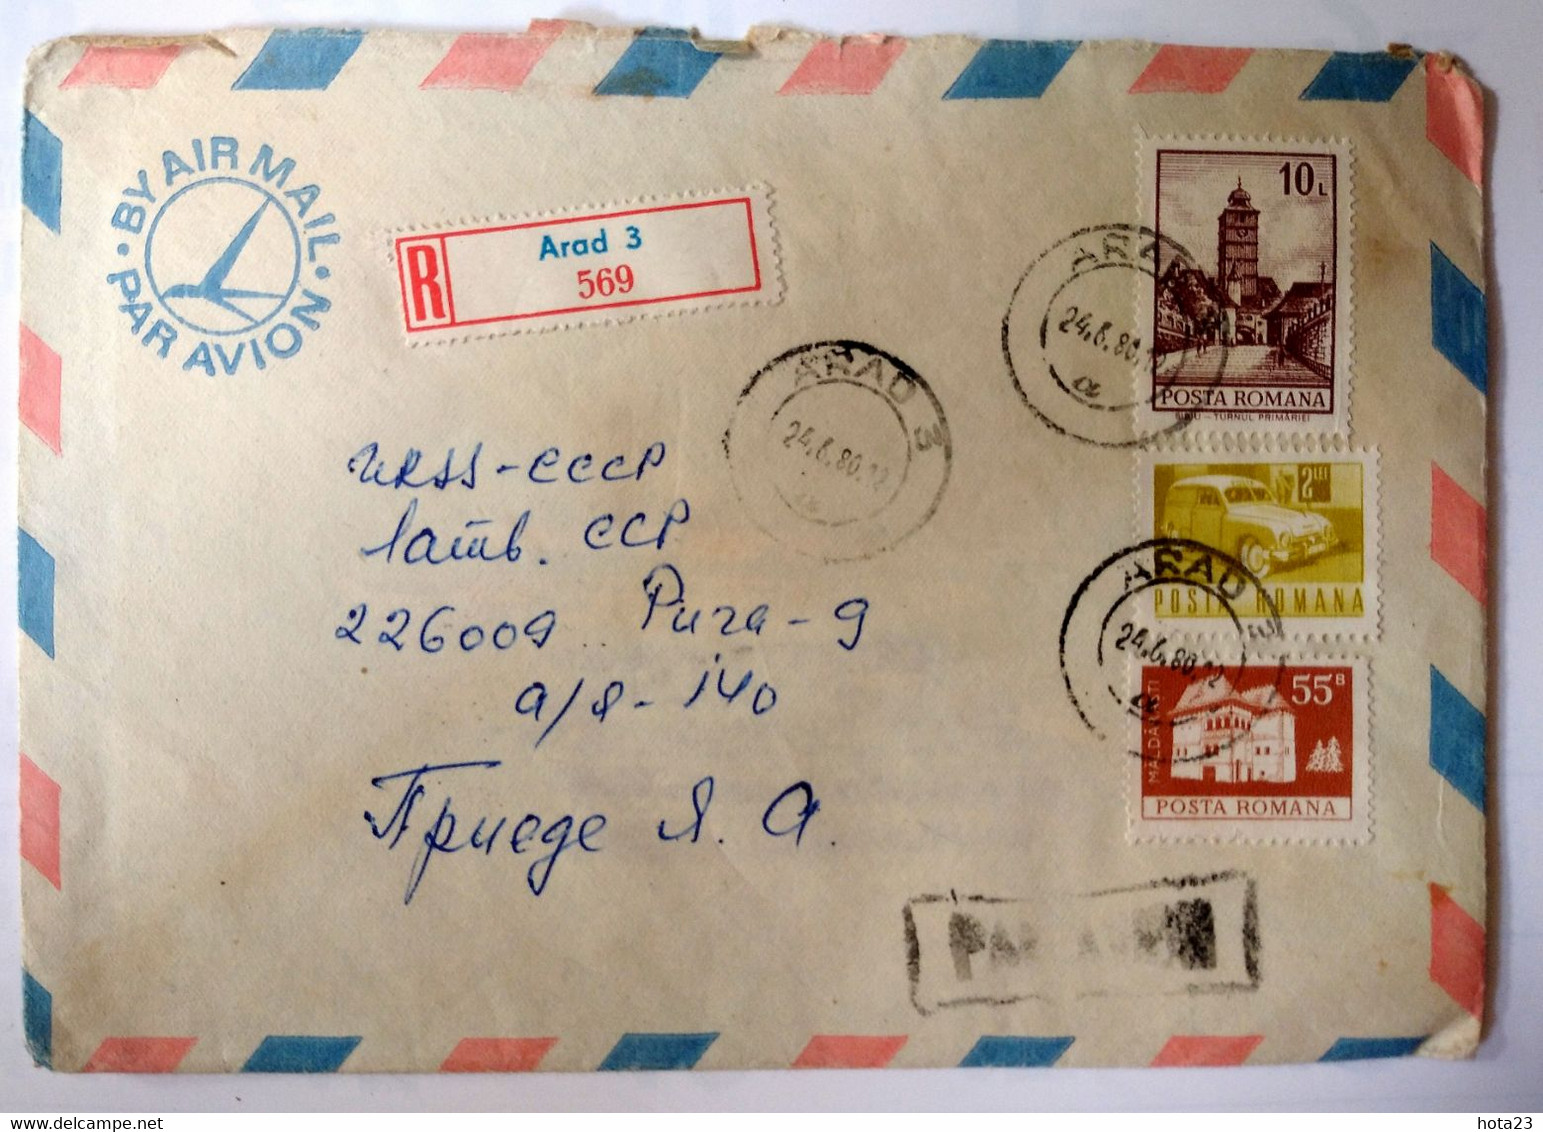 Romania - To Latvia Recorded - Recomended - Letter 24,06,1980 - Old Car - Old Castles - Covers & Documents